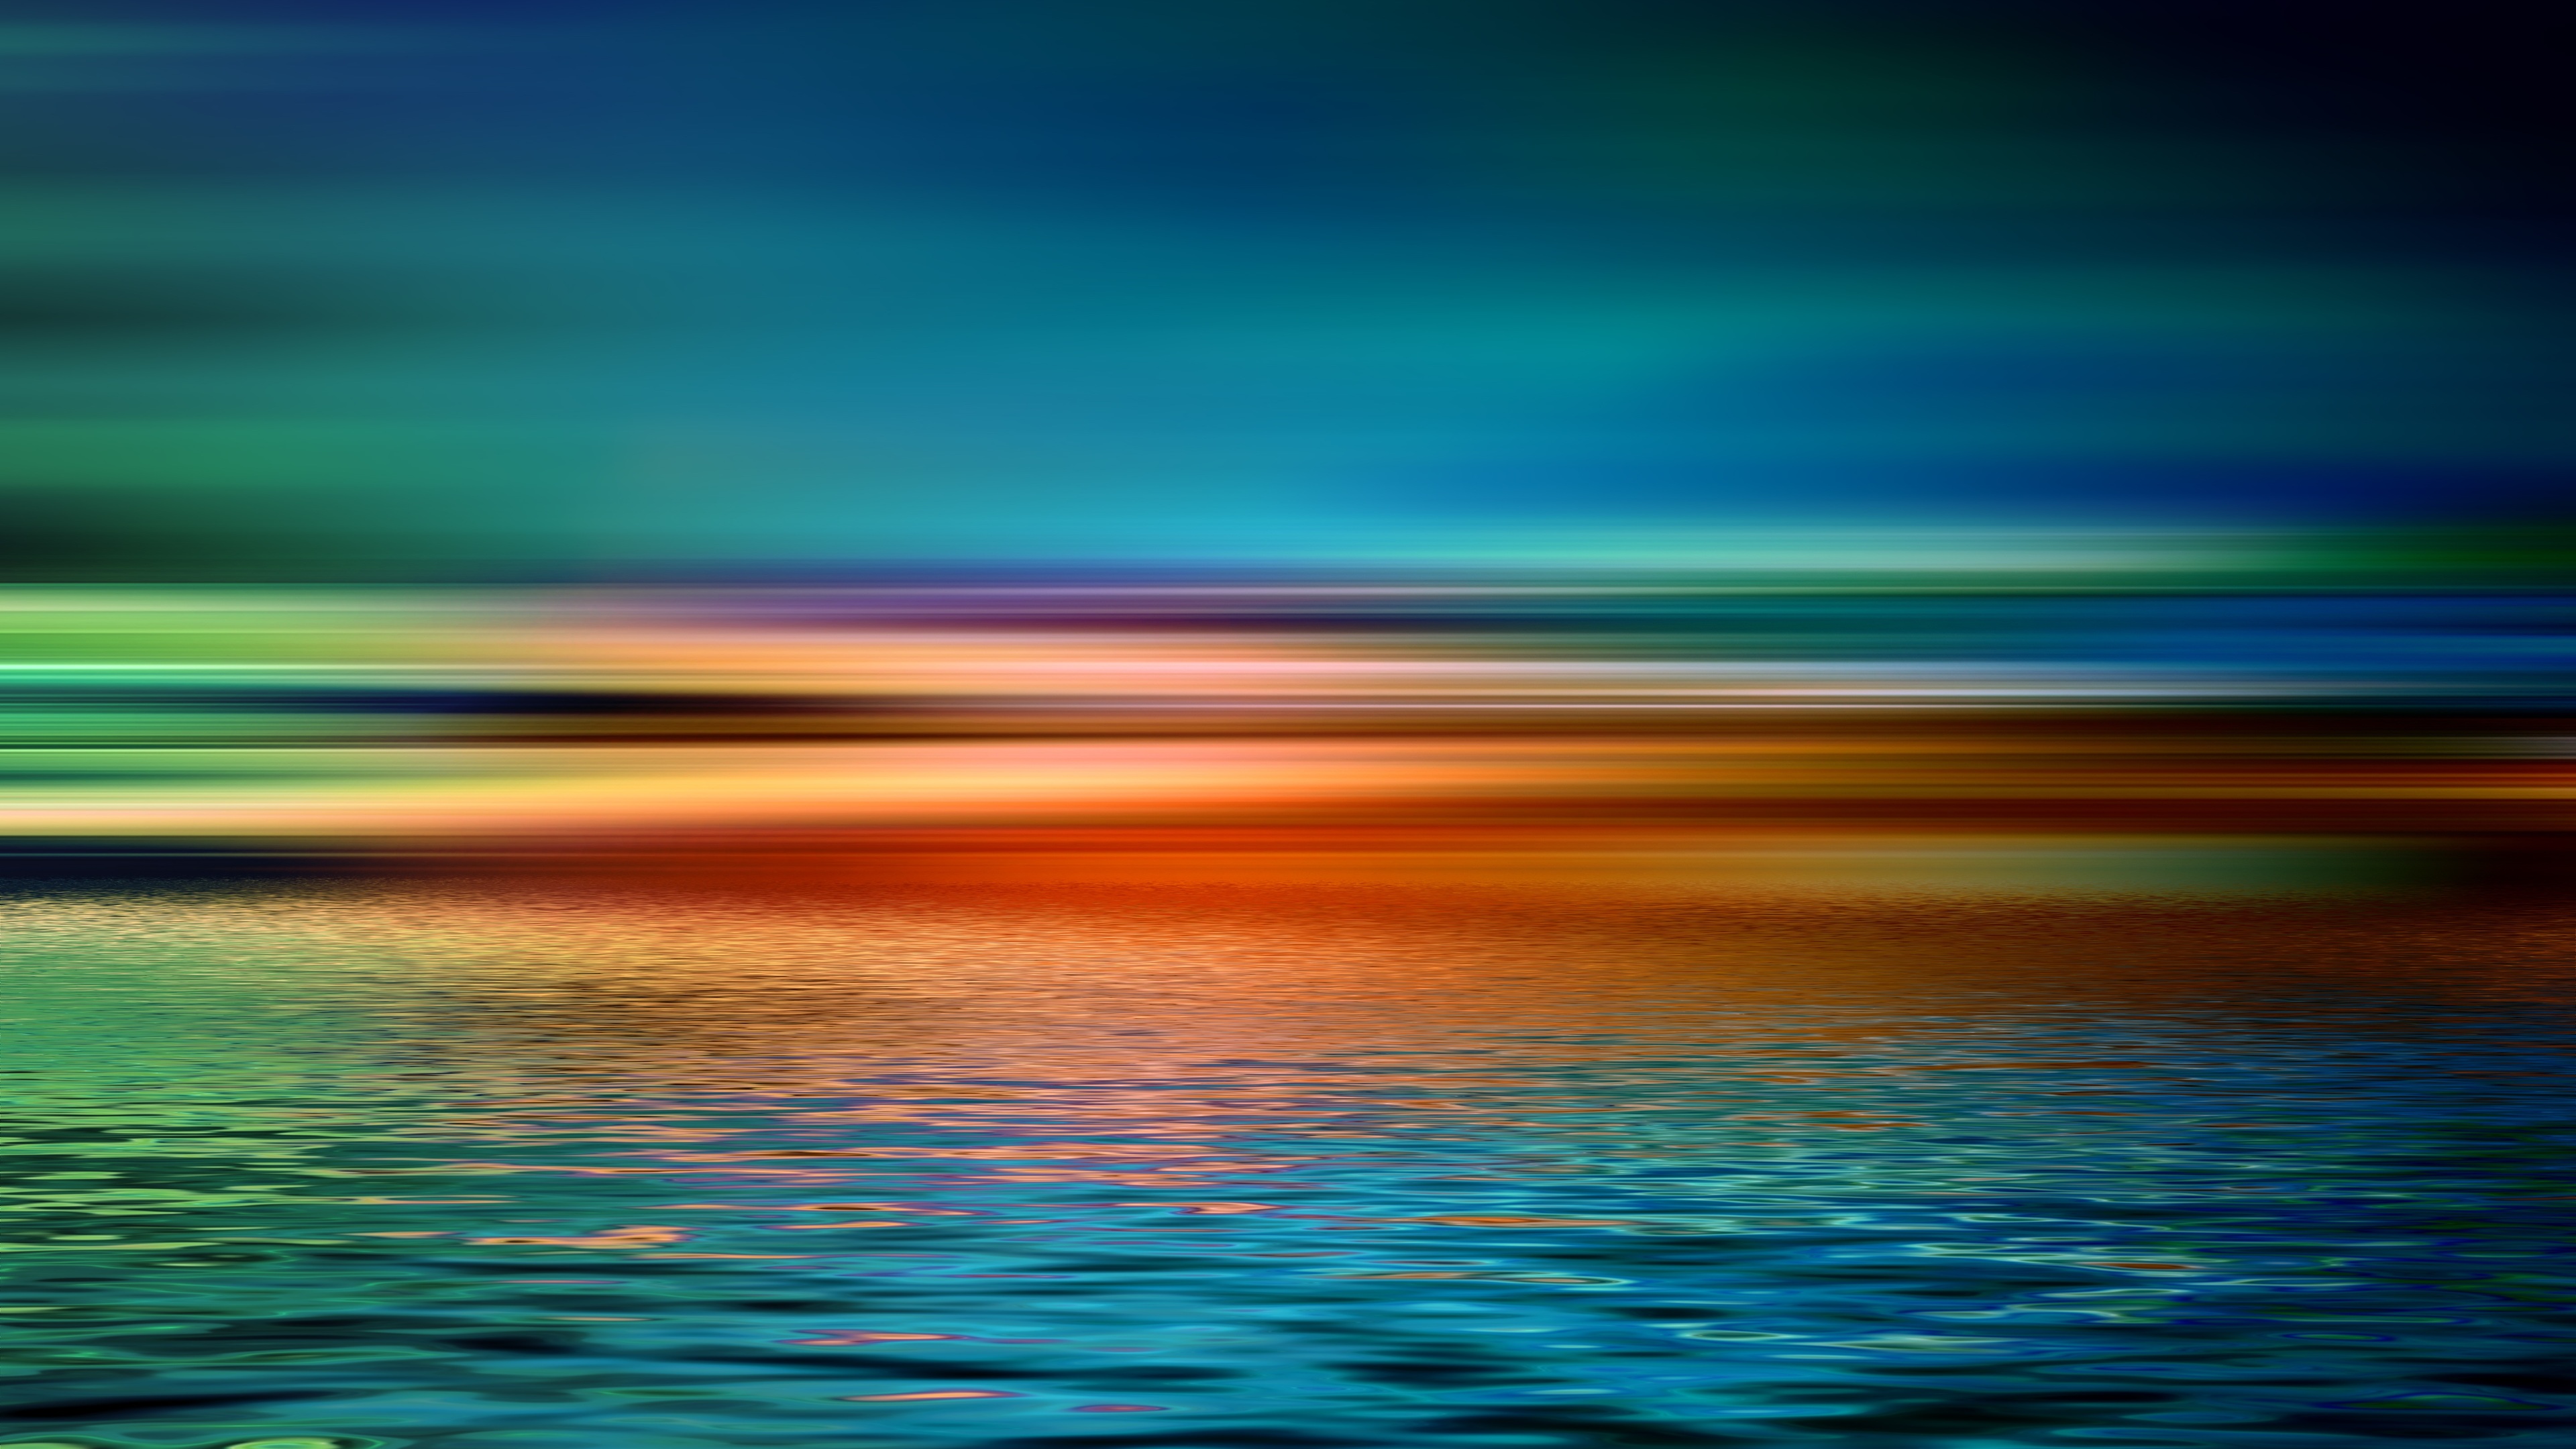 Colorful Artistic Sunset Over Water 4k Wallpaper 4k